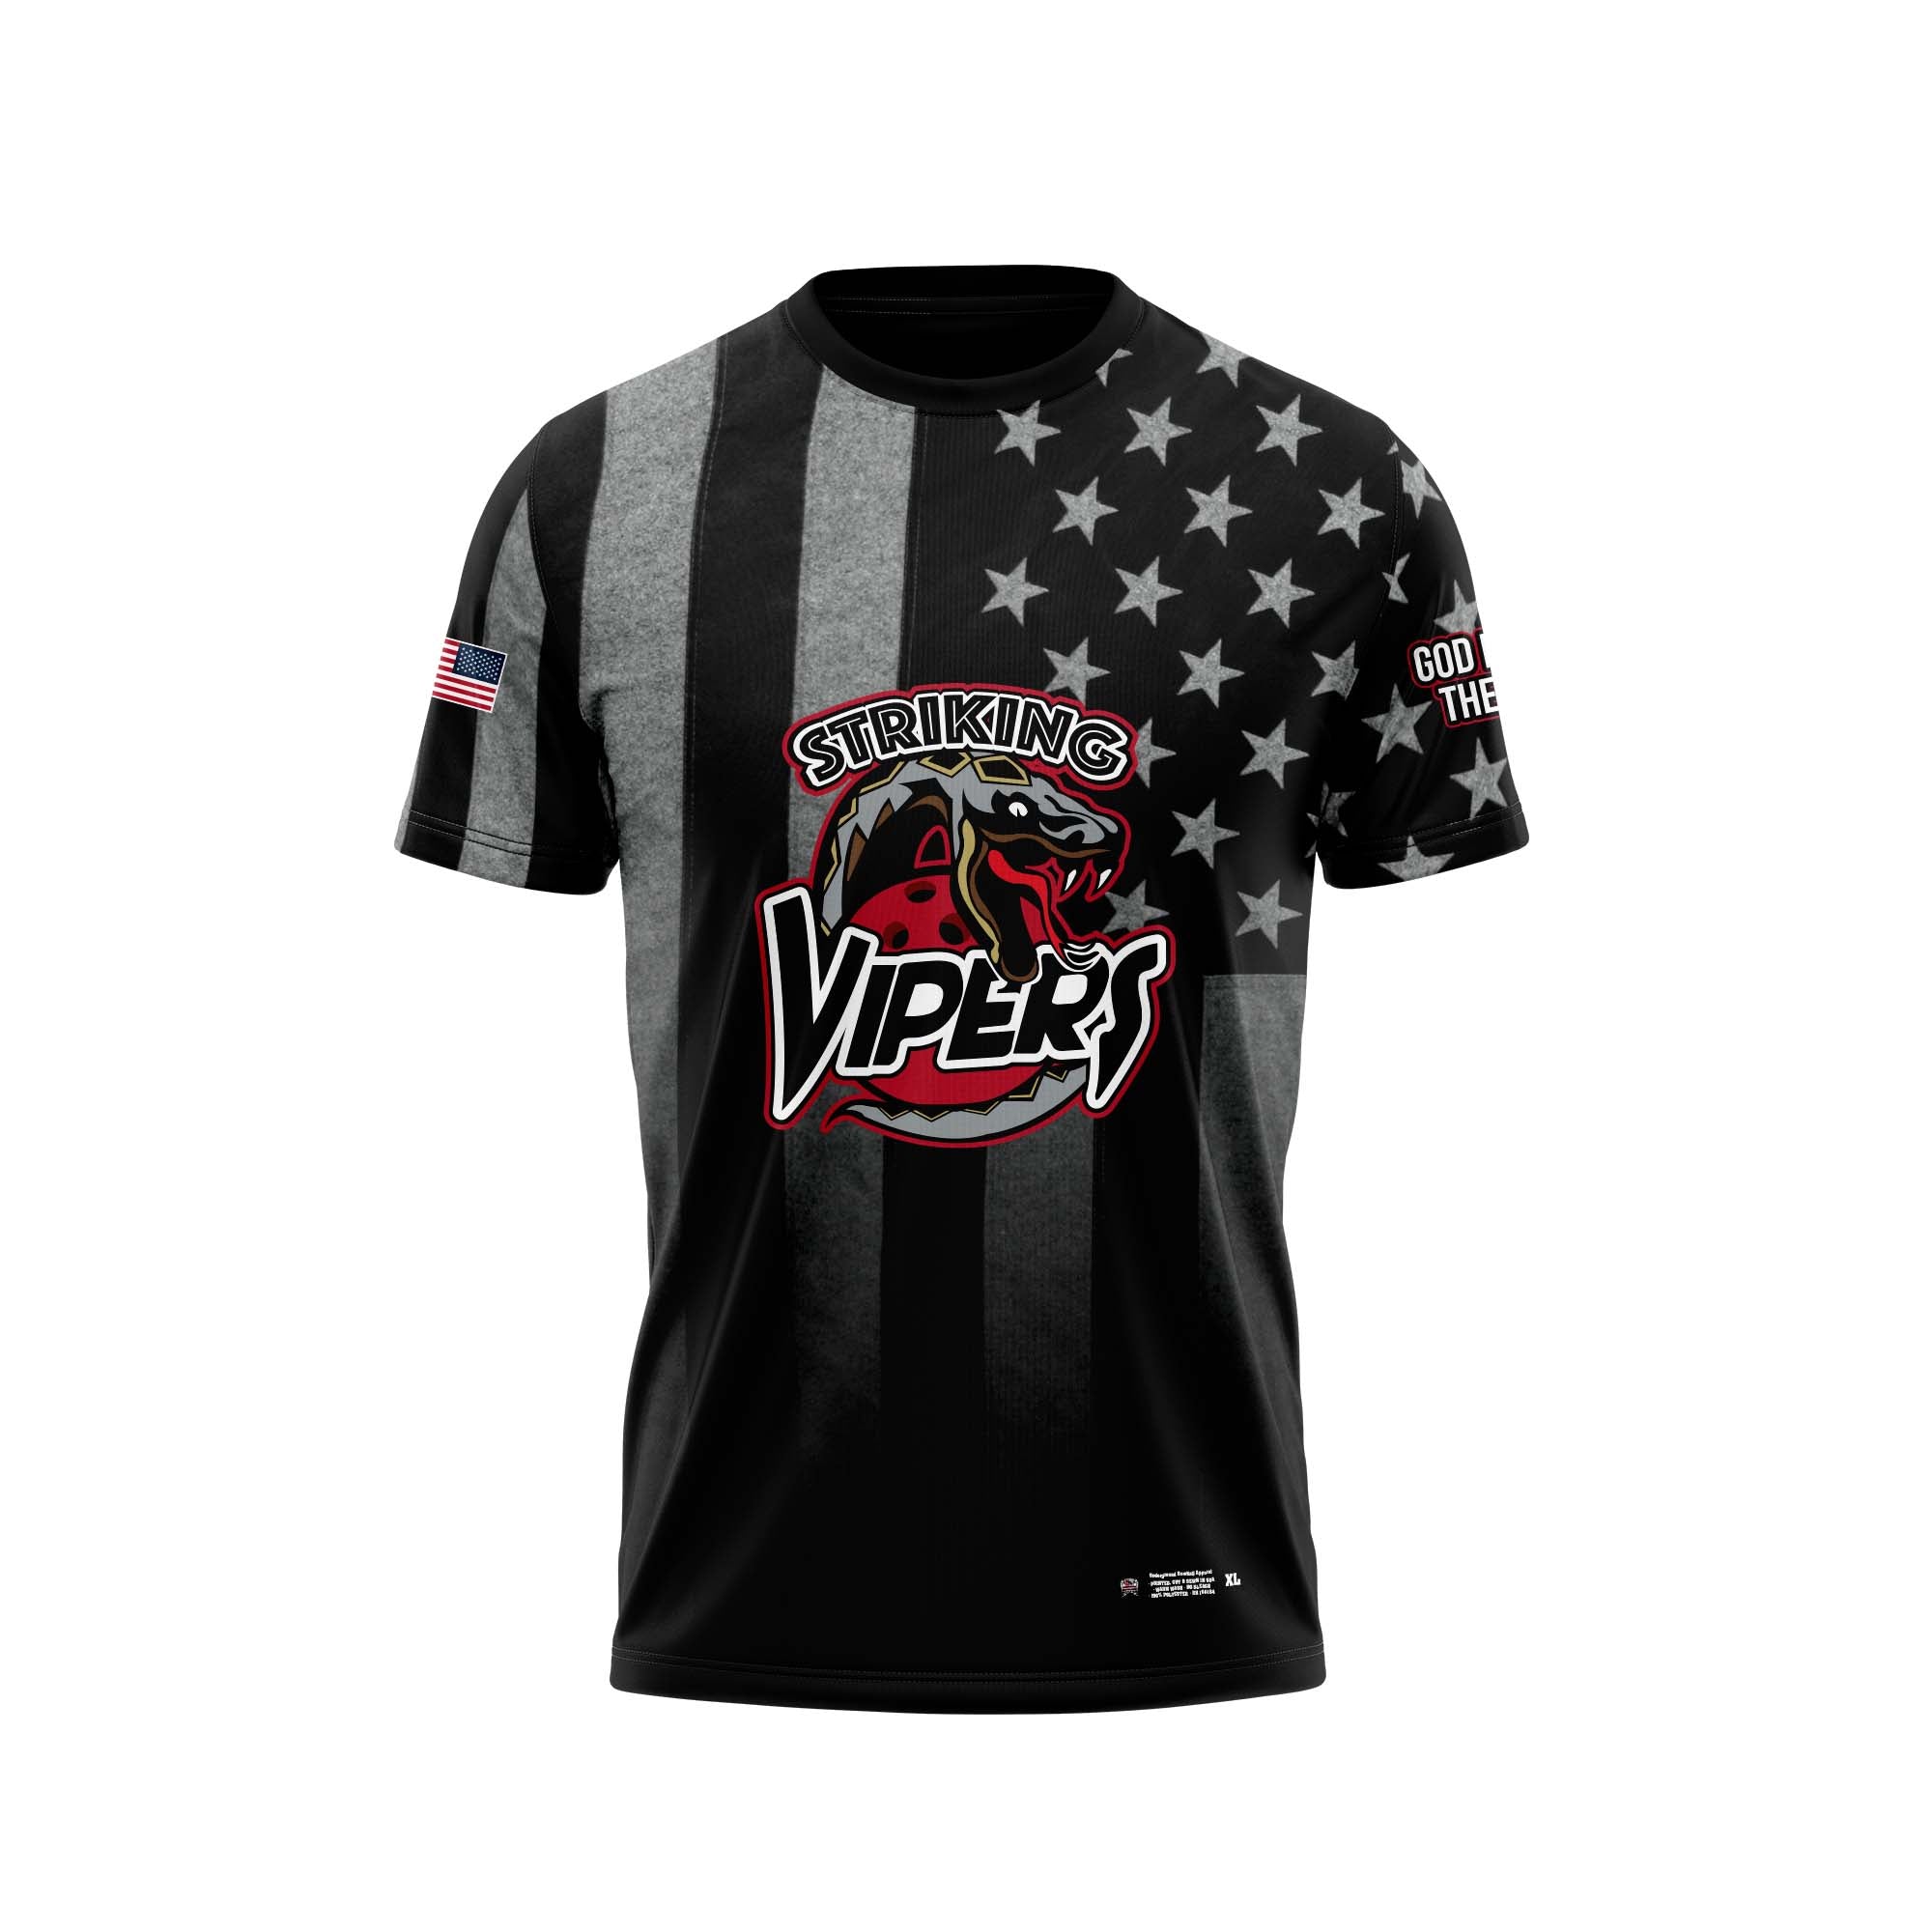 Striking Vipers Bnw Flag Jersey